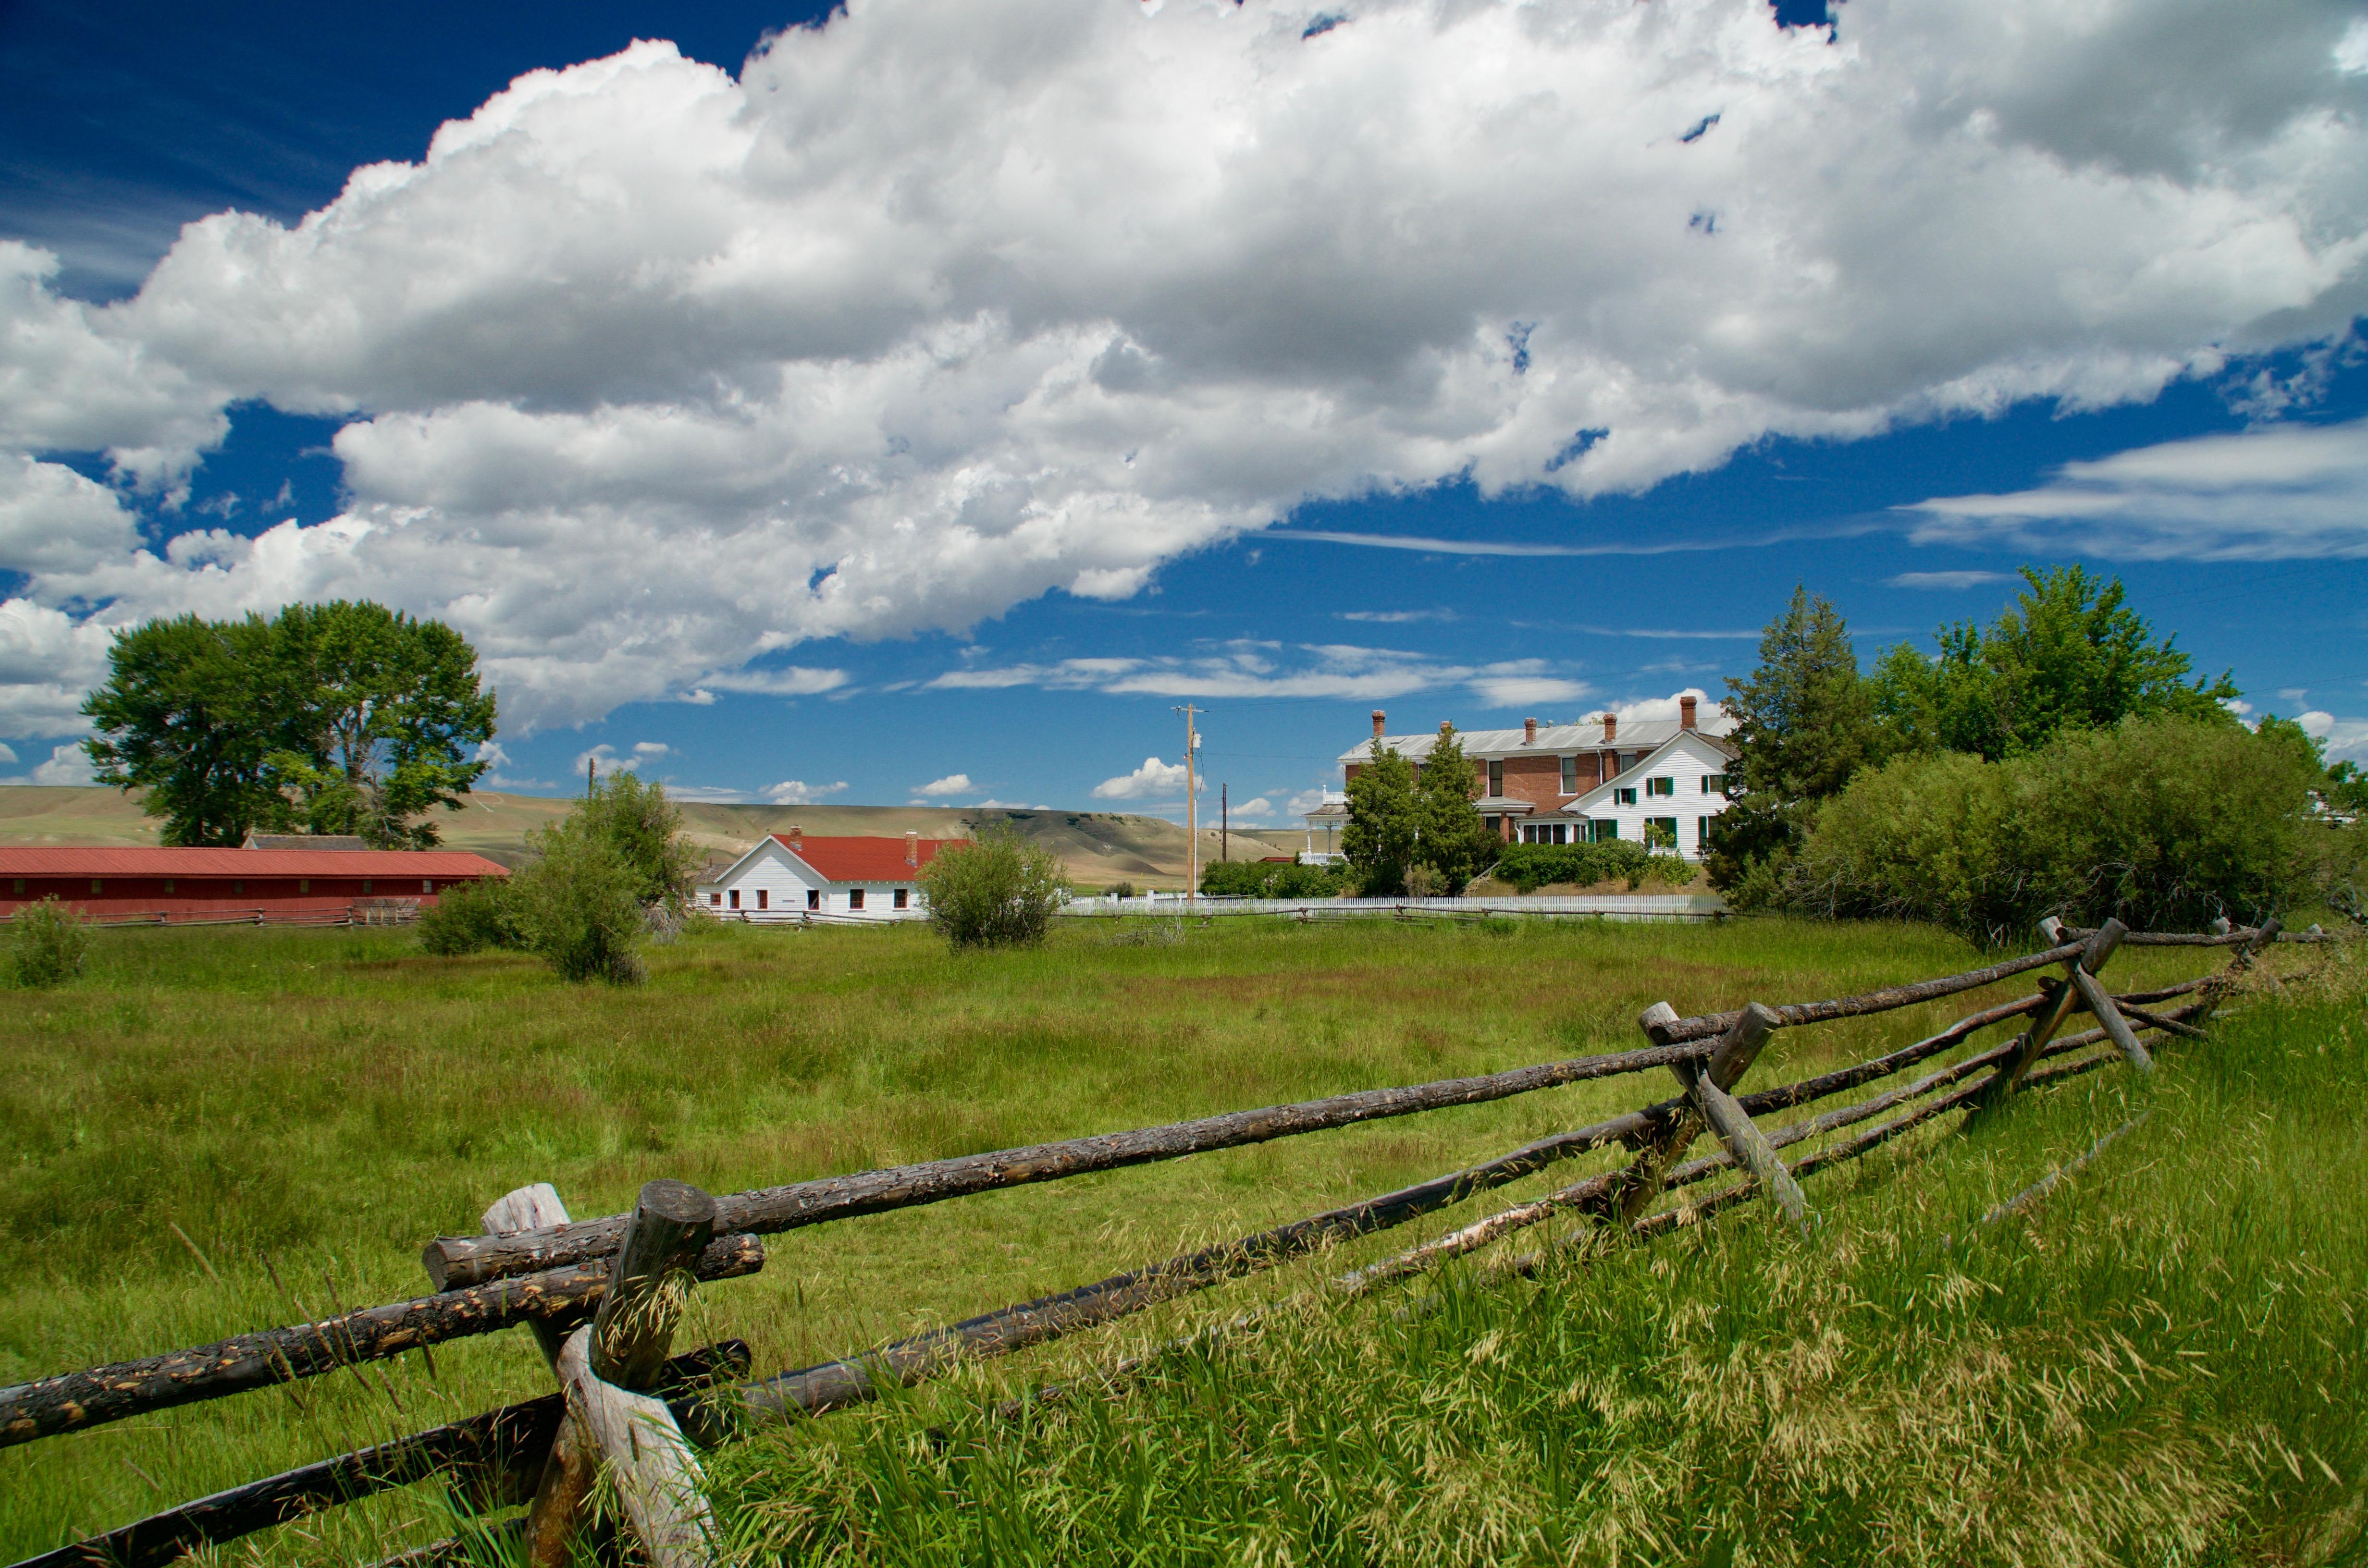 Fenced green pasture in front, 3 ranch buildings across center, blue sky with large white clouds.